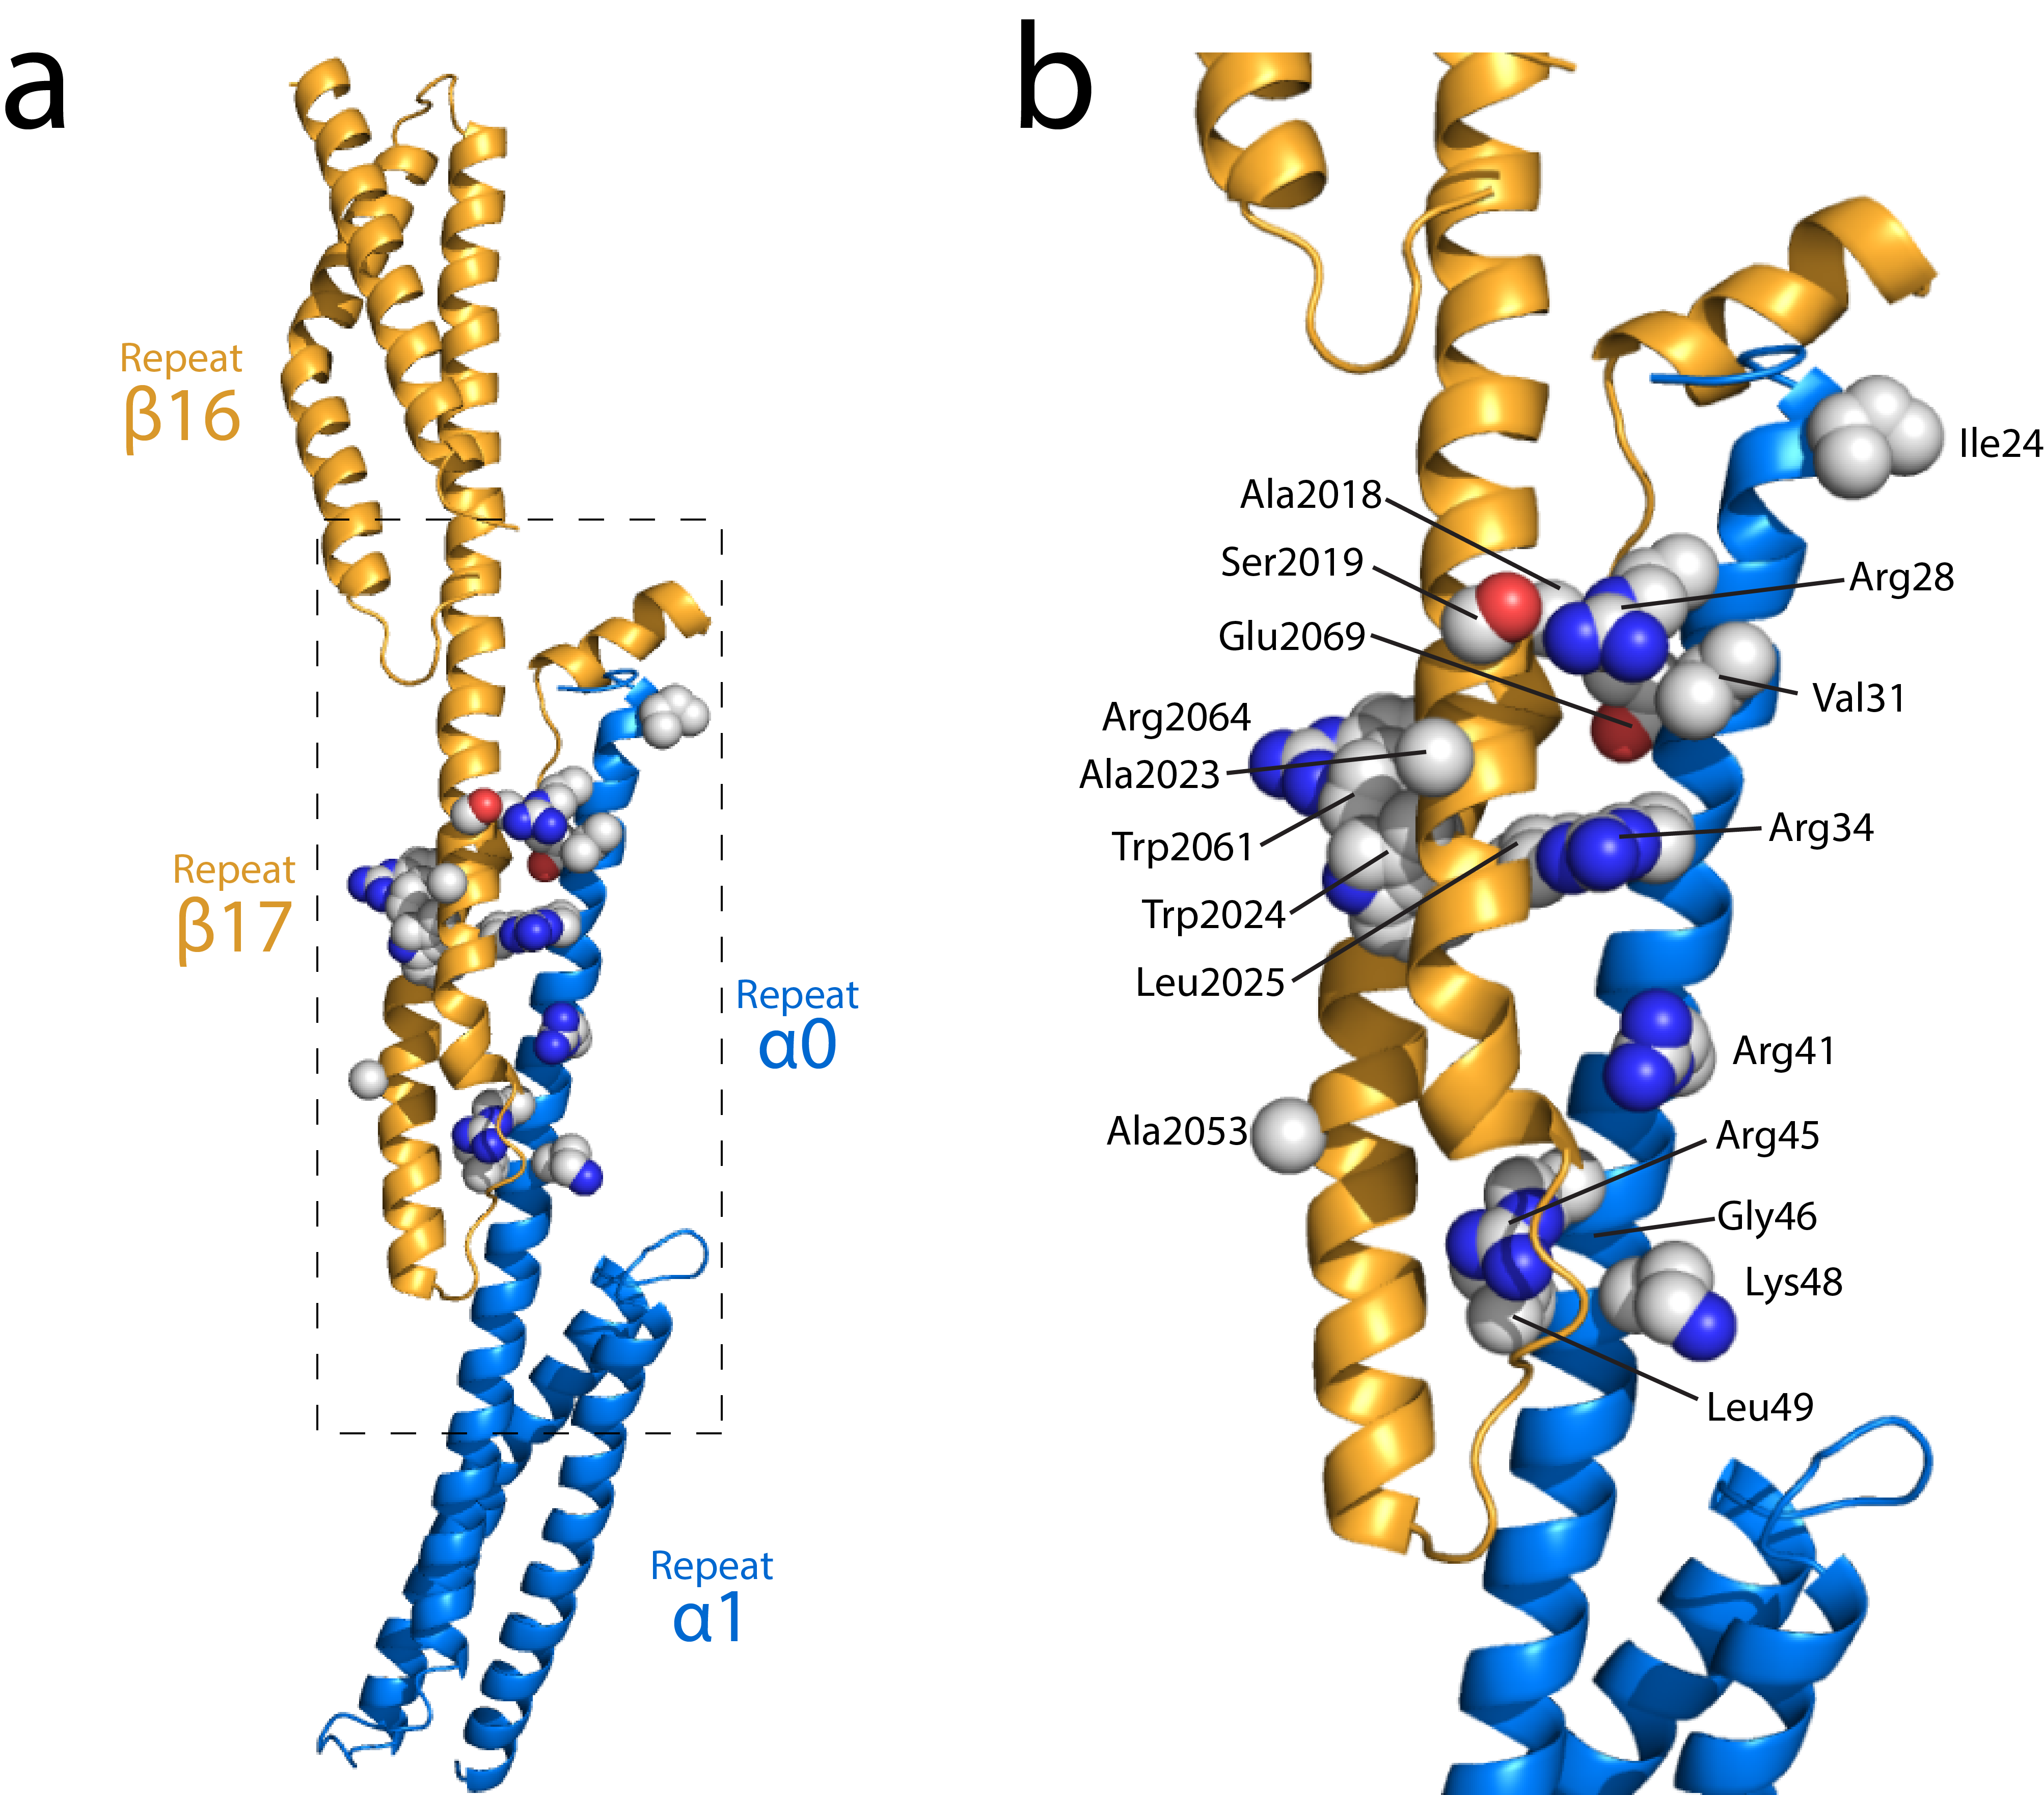 Structure of the spectrin tetramerization domains